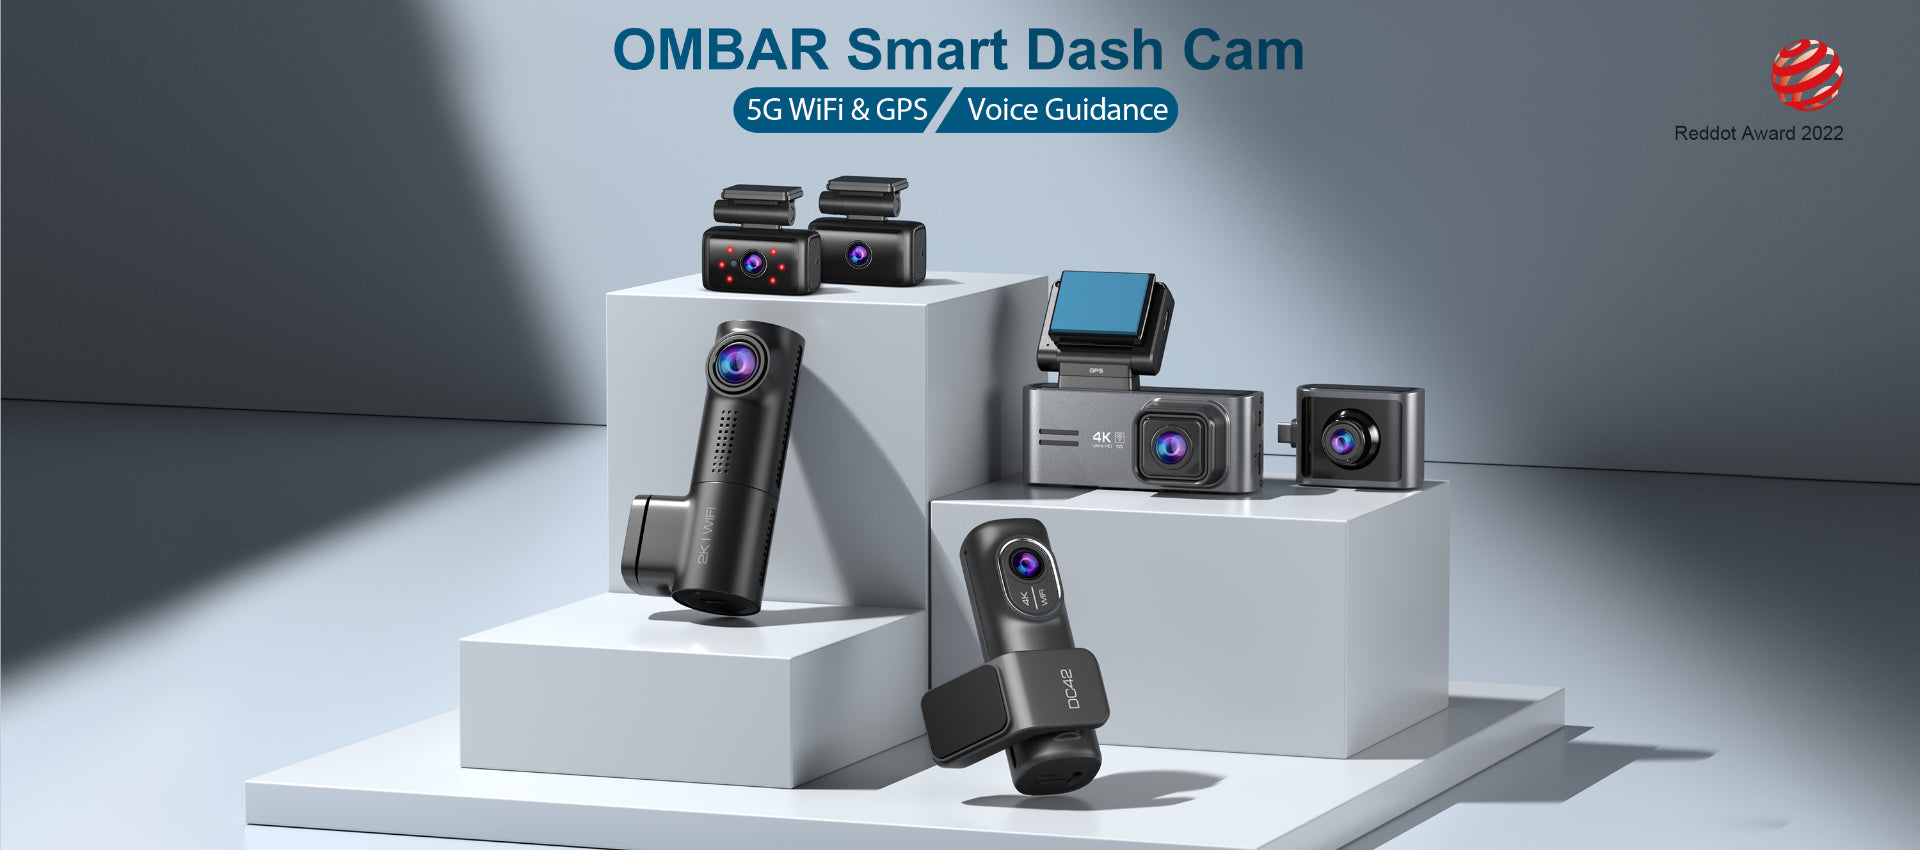 welcome to ombarcam.com